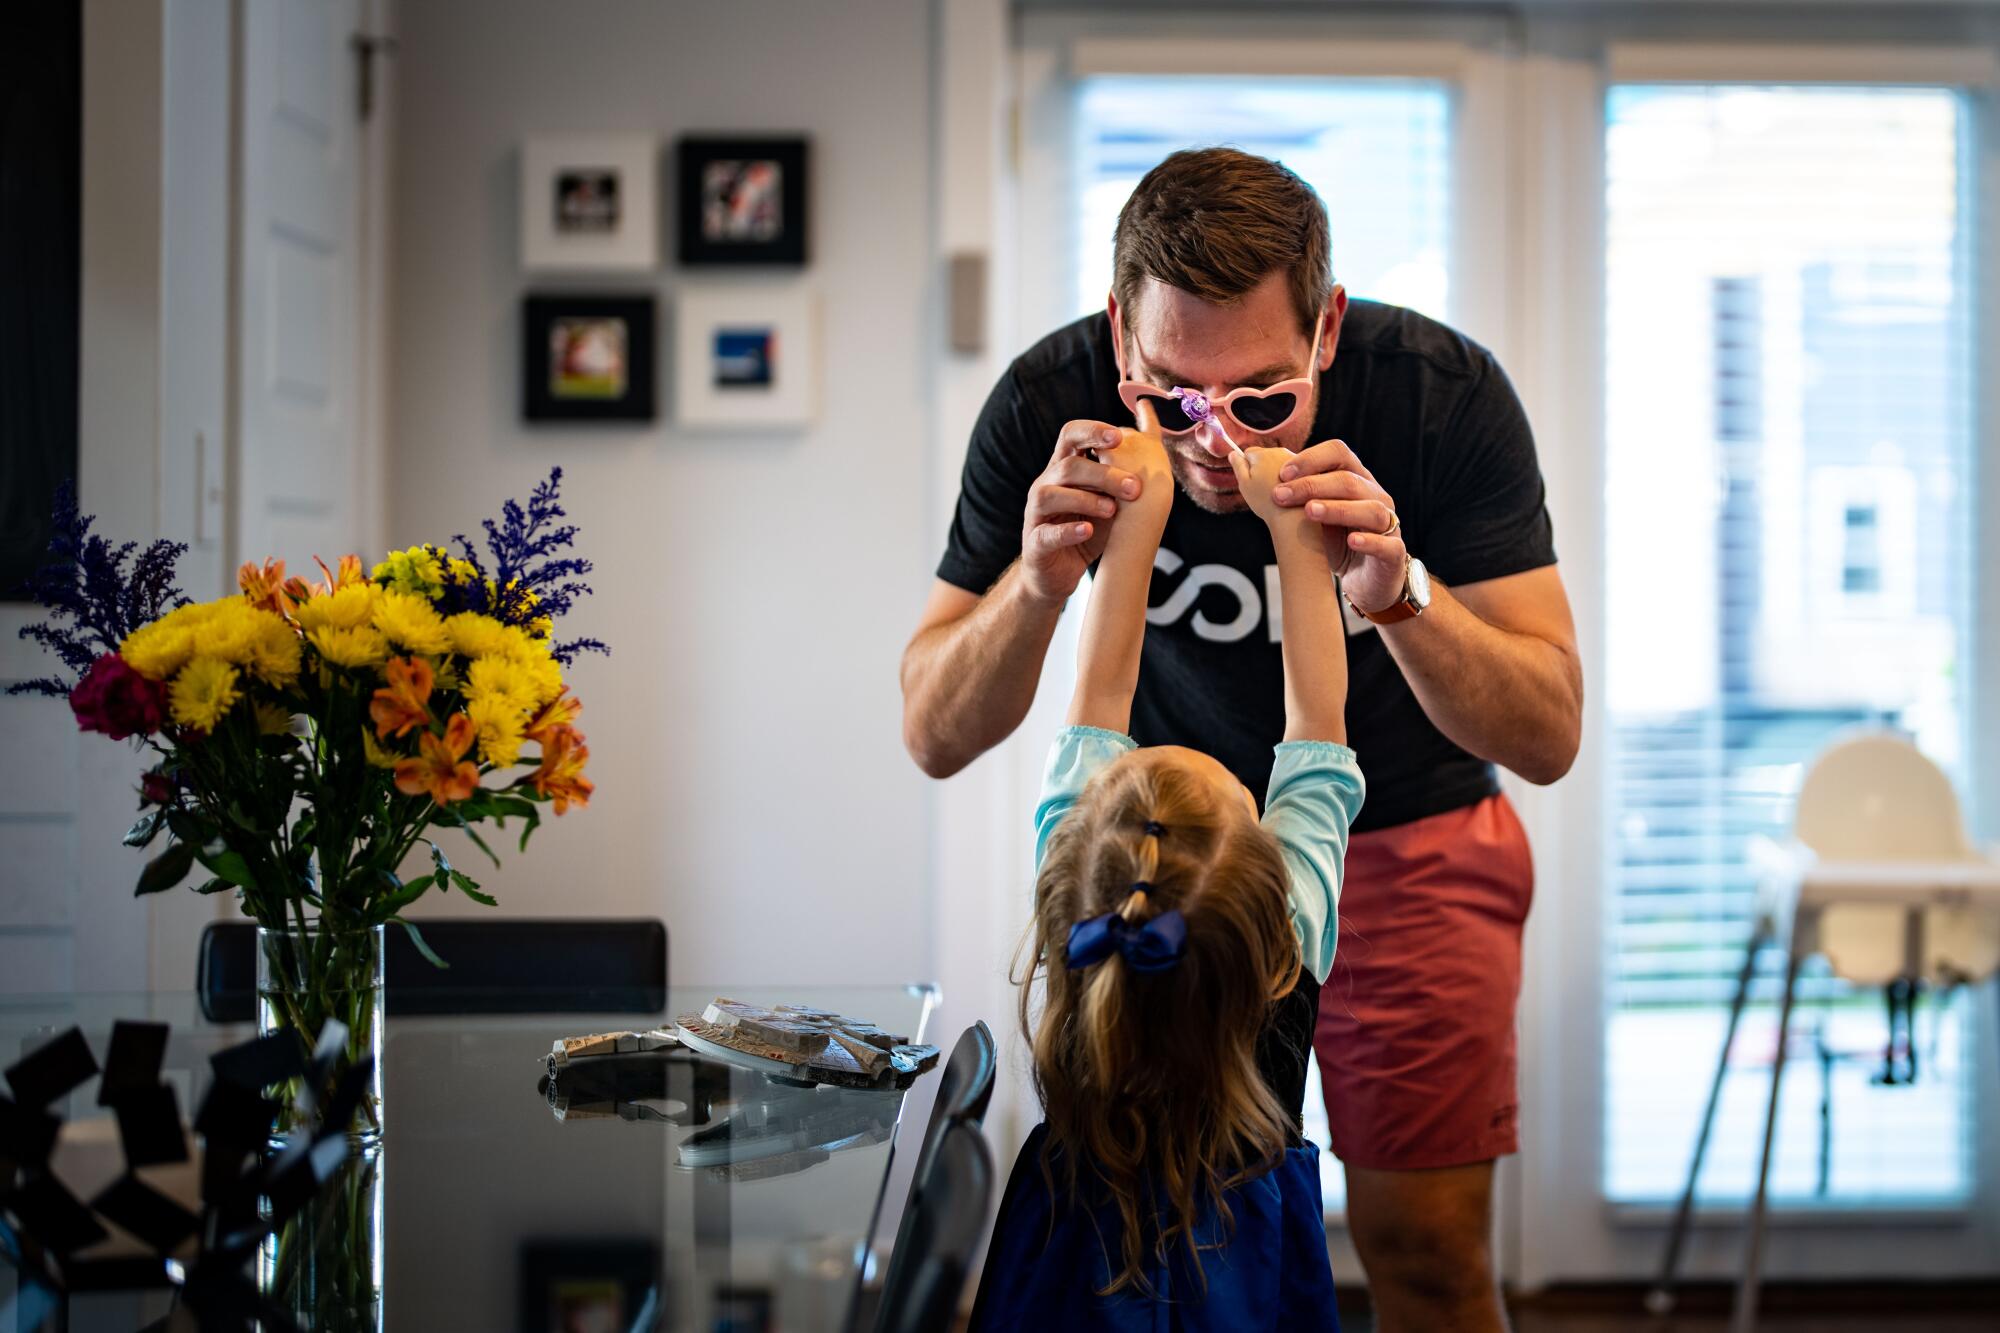 Rep. Eric Swalwell wears a pair of heart-shaped sunglasses while playing with his daughter, Kathryn, 3.